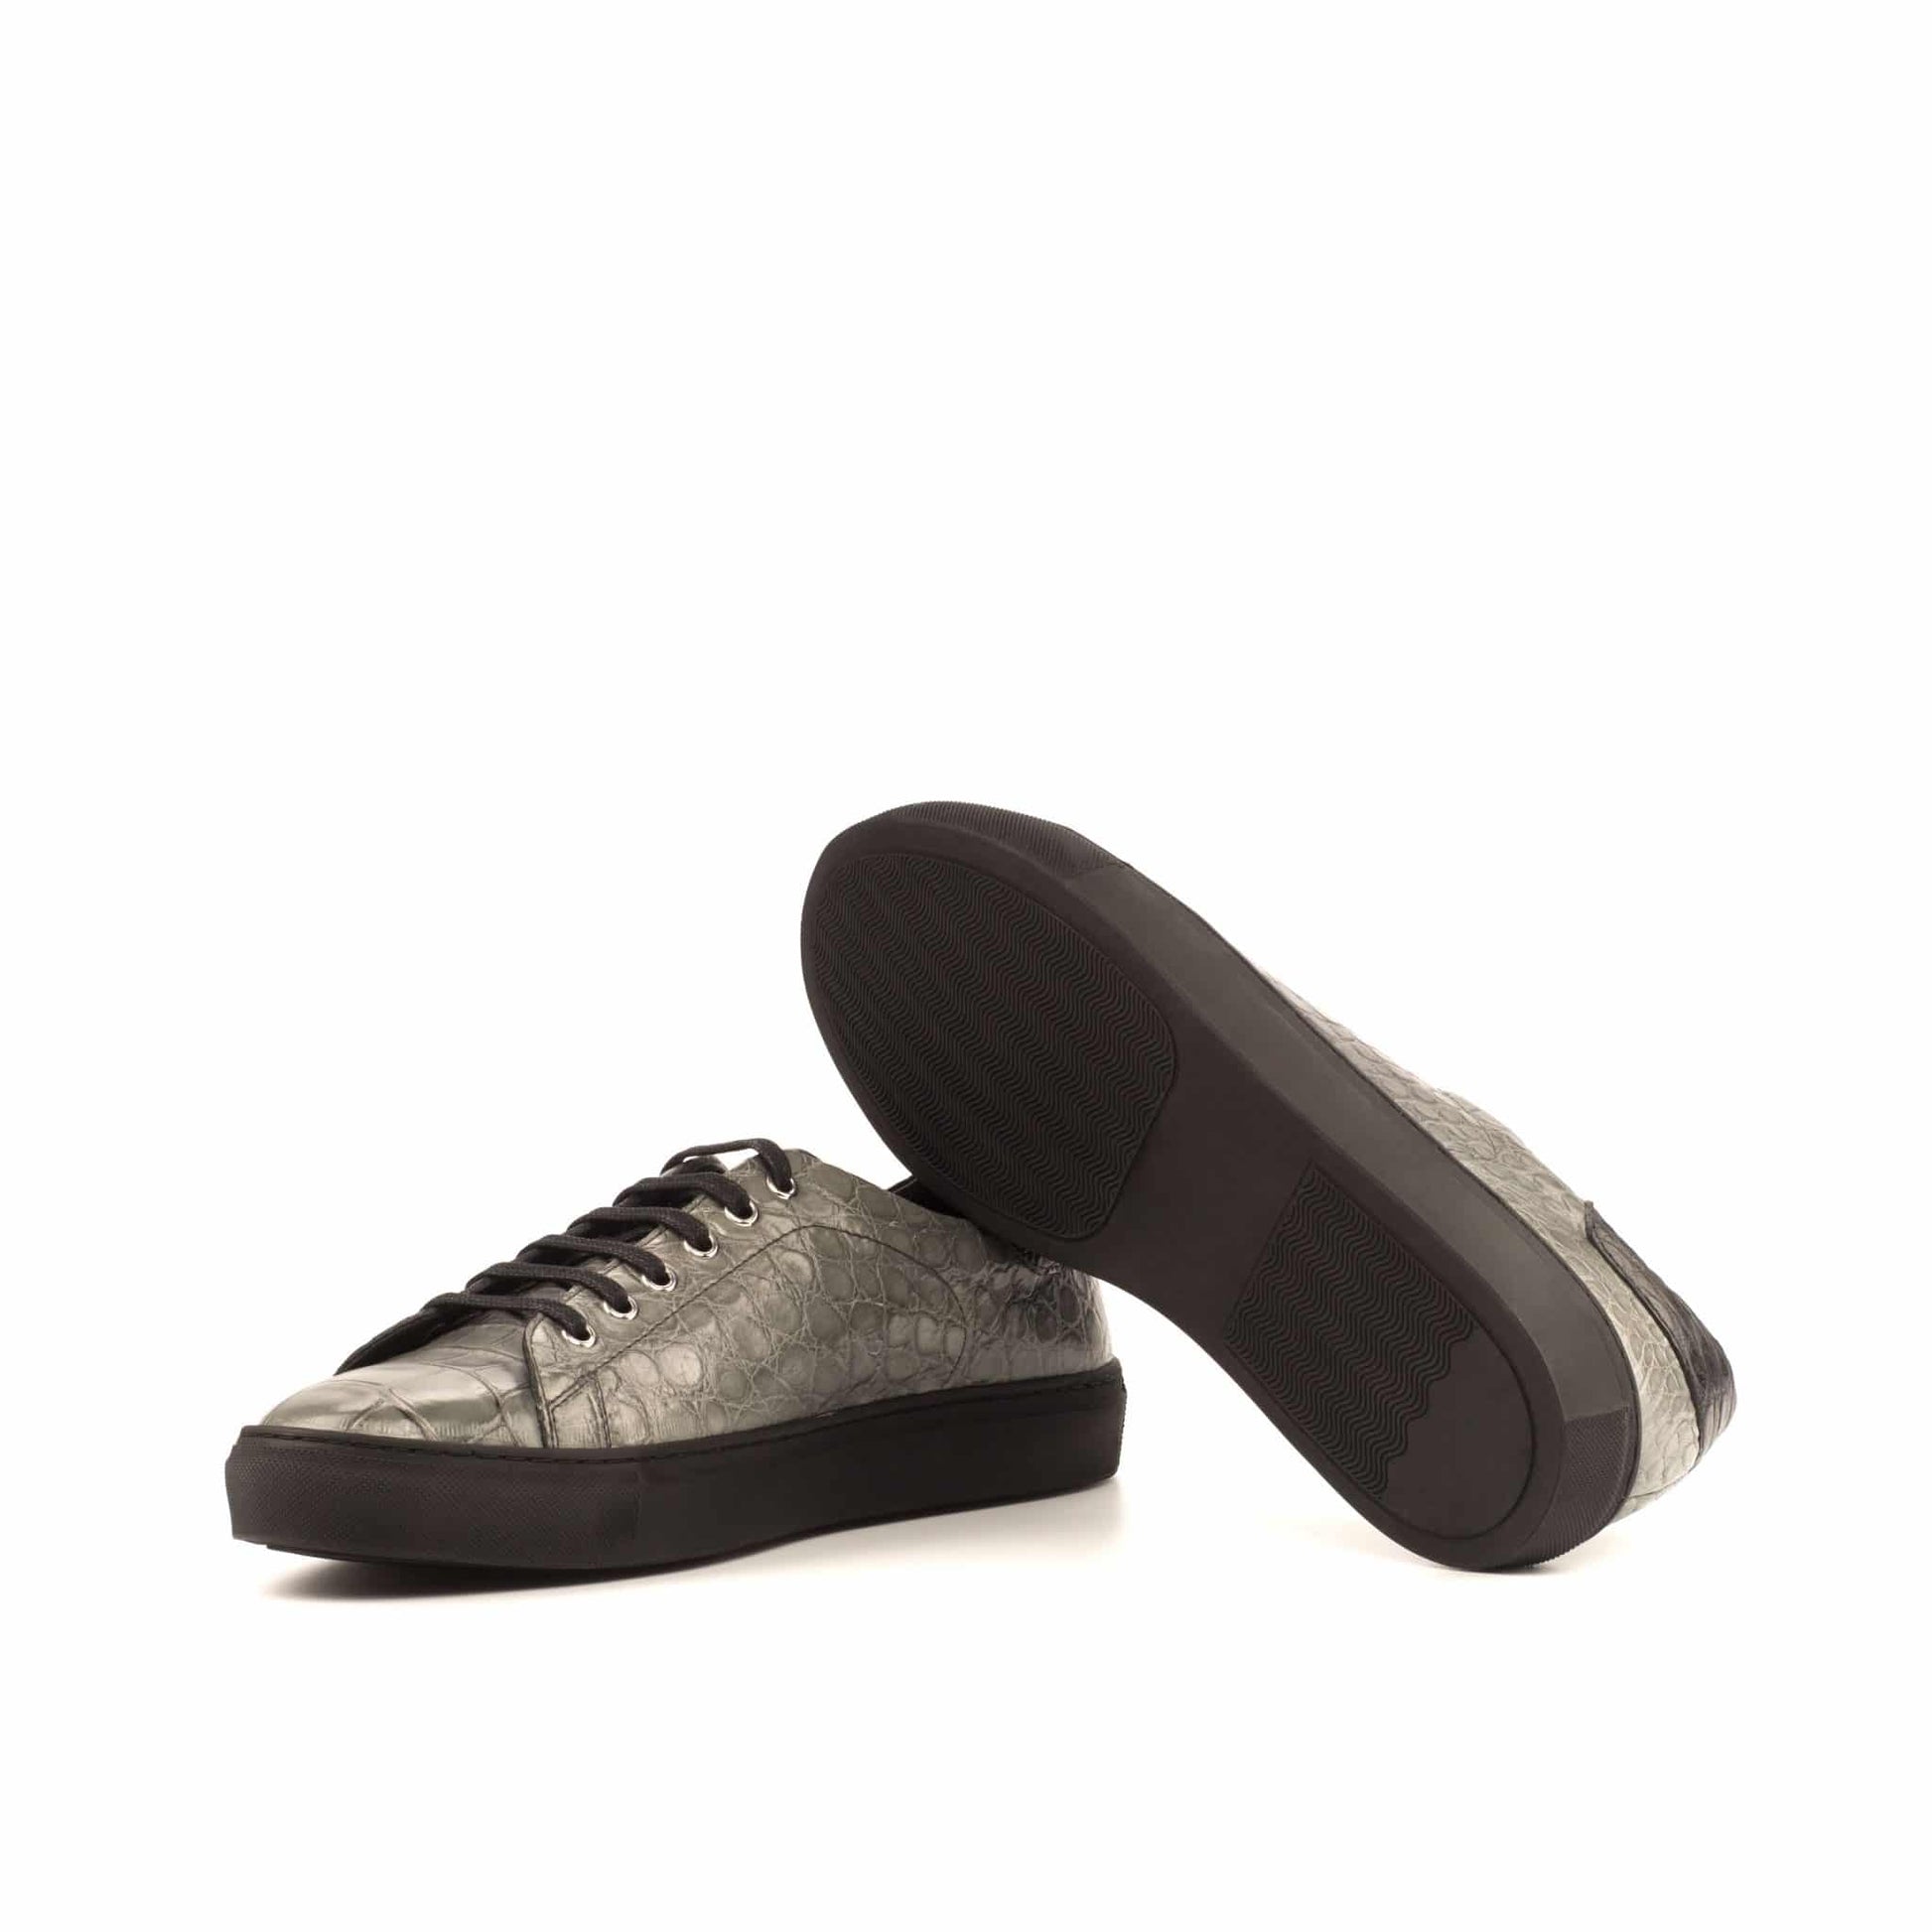 Grey Patina Finish Croco Print Leather Low Top Lace Up Sneaker for Men. Black Comfortable Cup Sole.